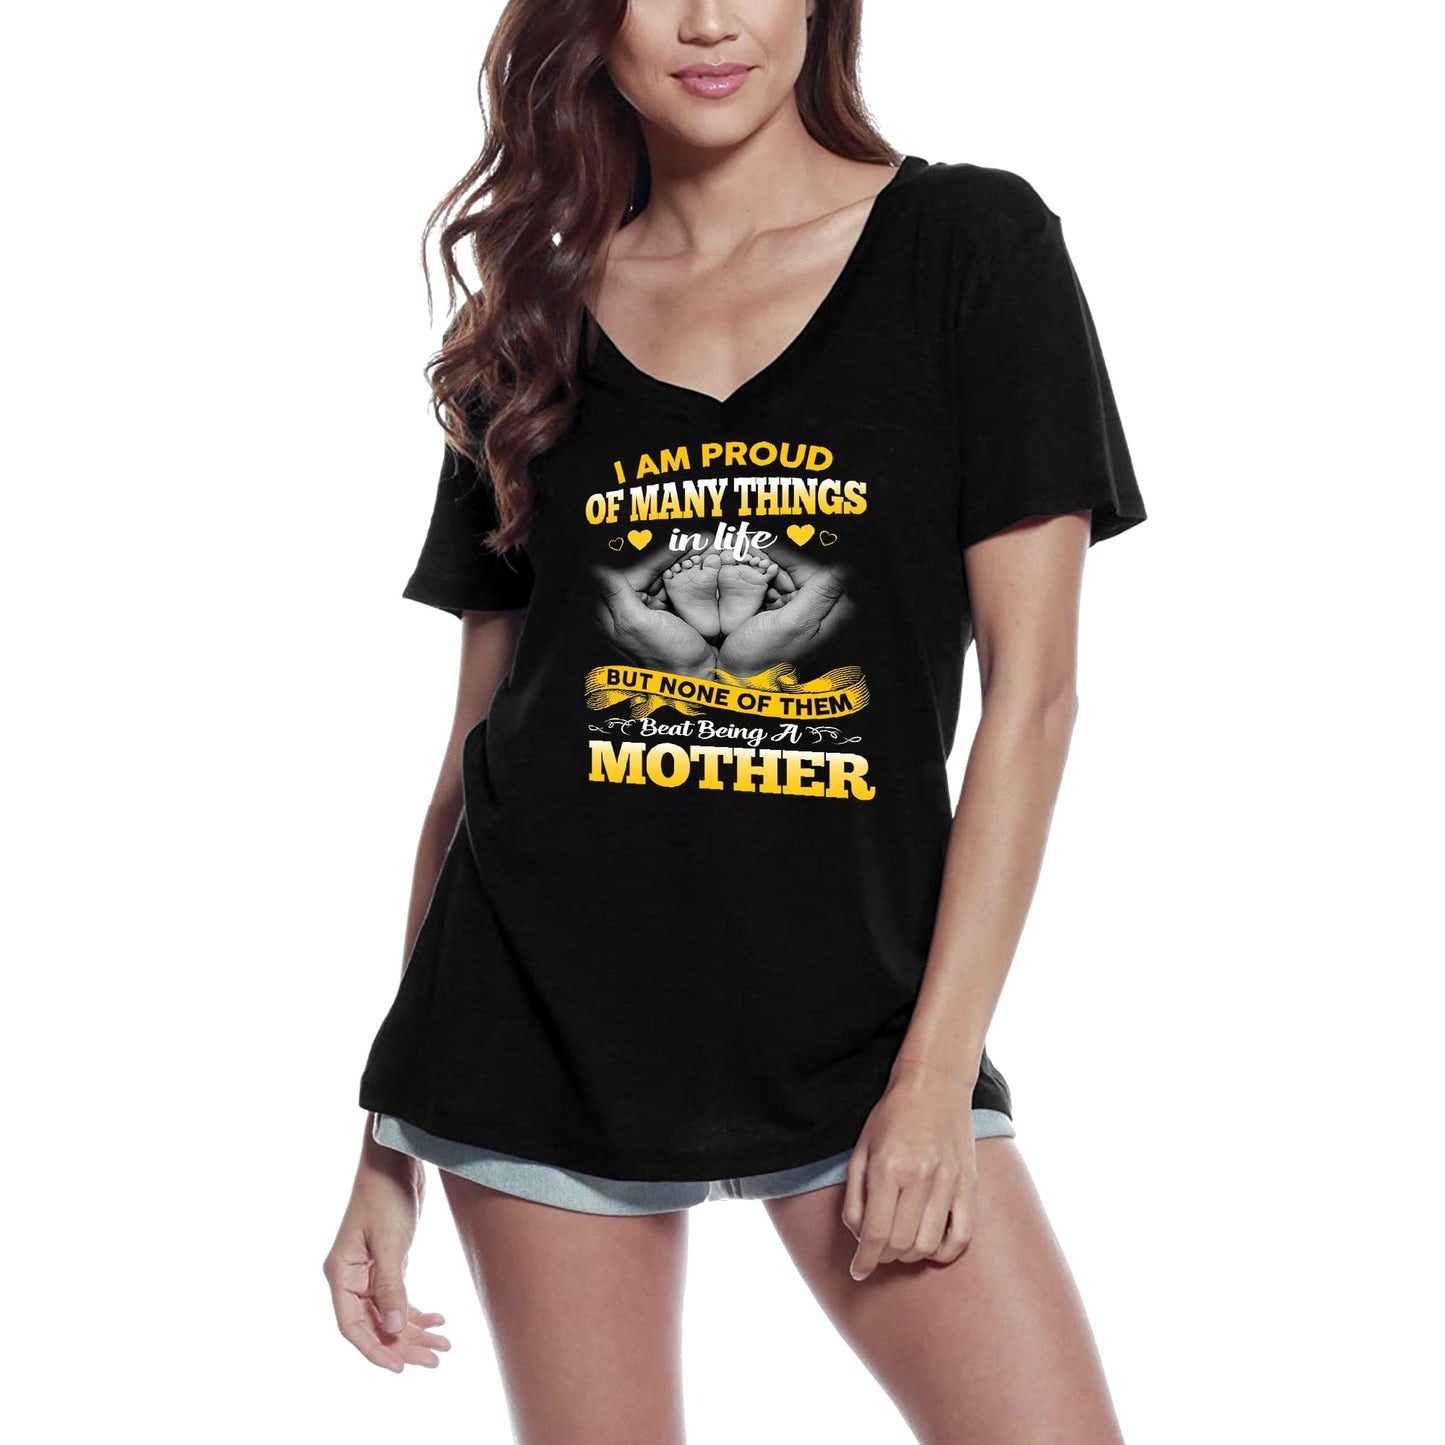 ULTRABASIC Women's T-Shirt I Am Proud of Many Things in Life But None of Them Beat Being Mother